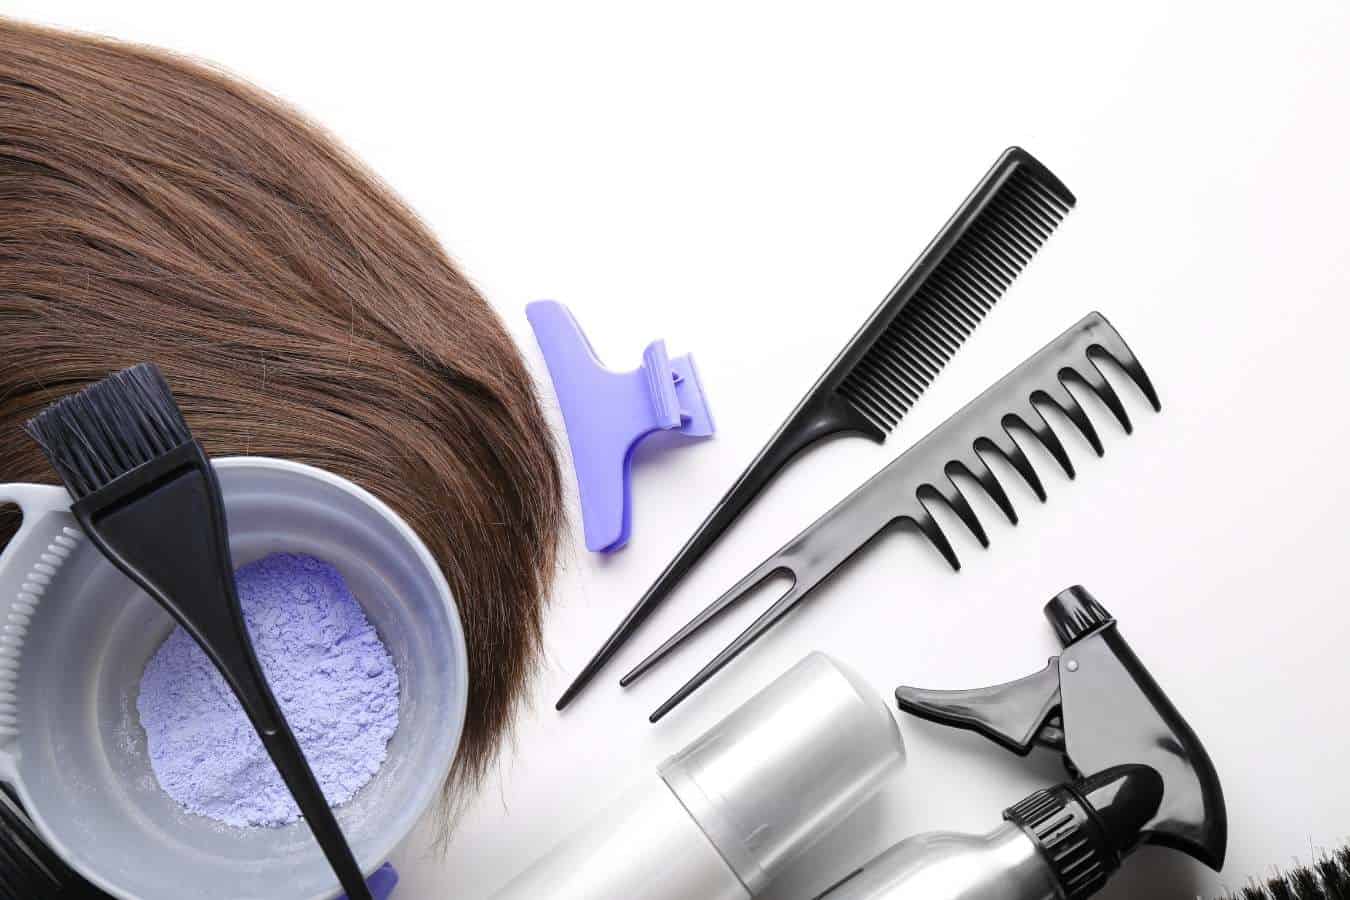 How to Safely Bleach Your Hair at Home